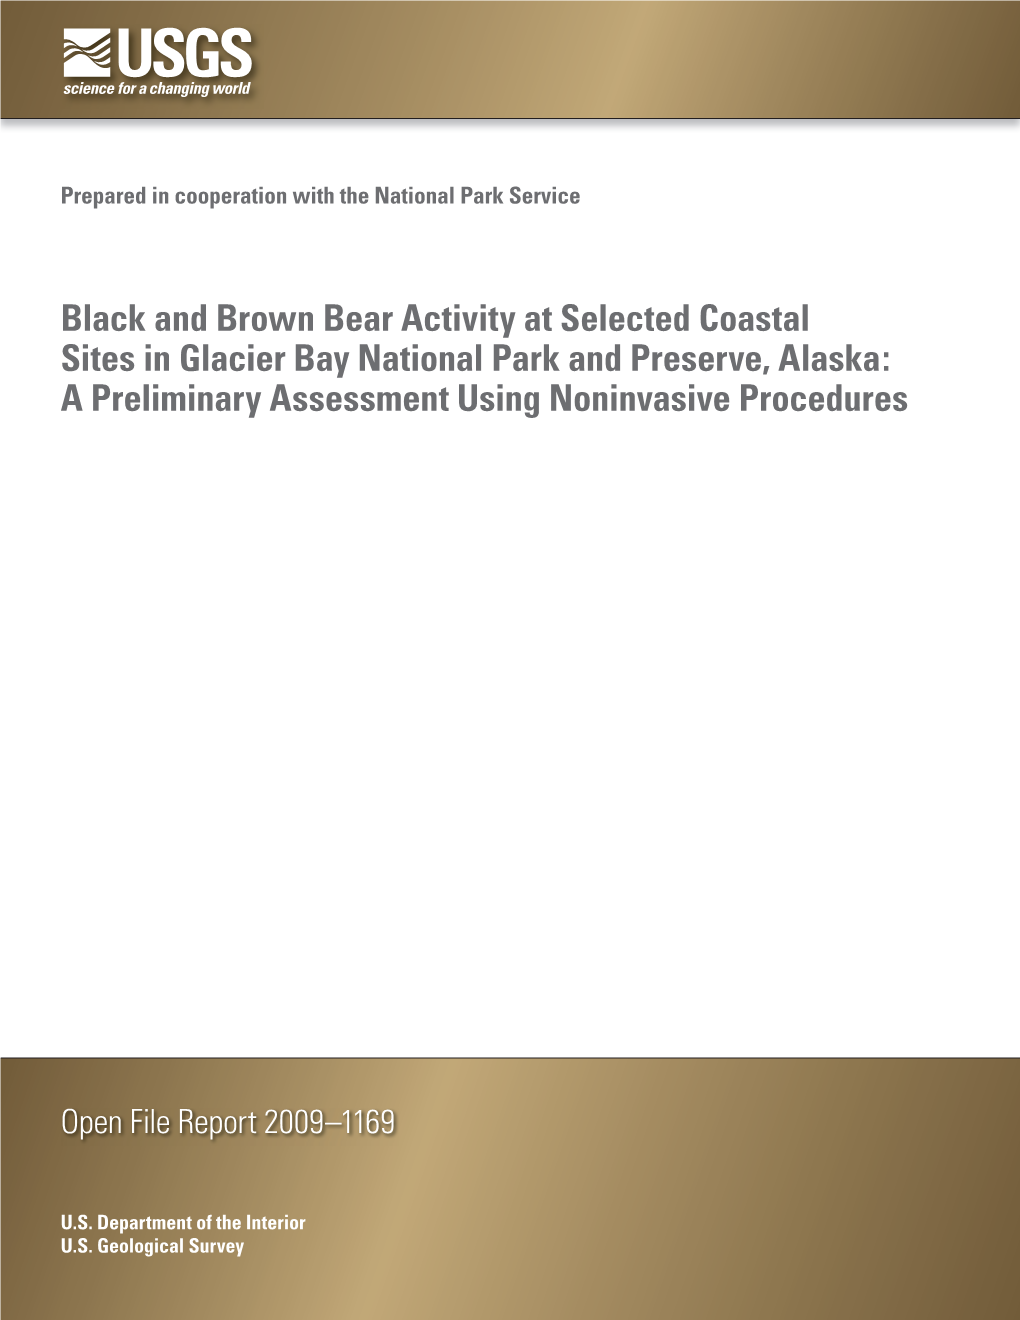 Bear Activity and Habitat Assessment of Eight Shoreline Areas in Glacier